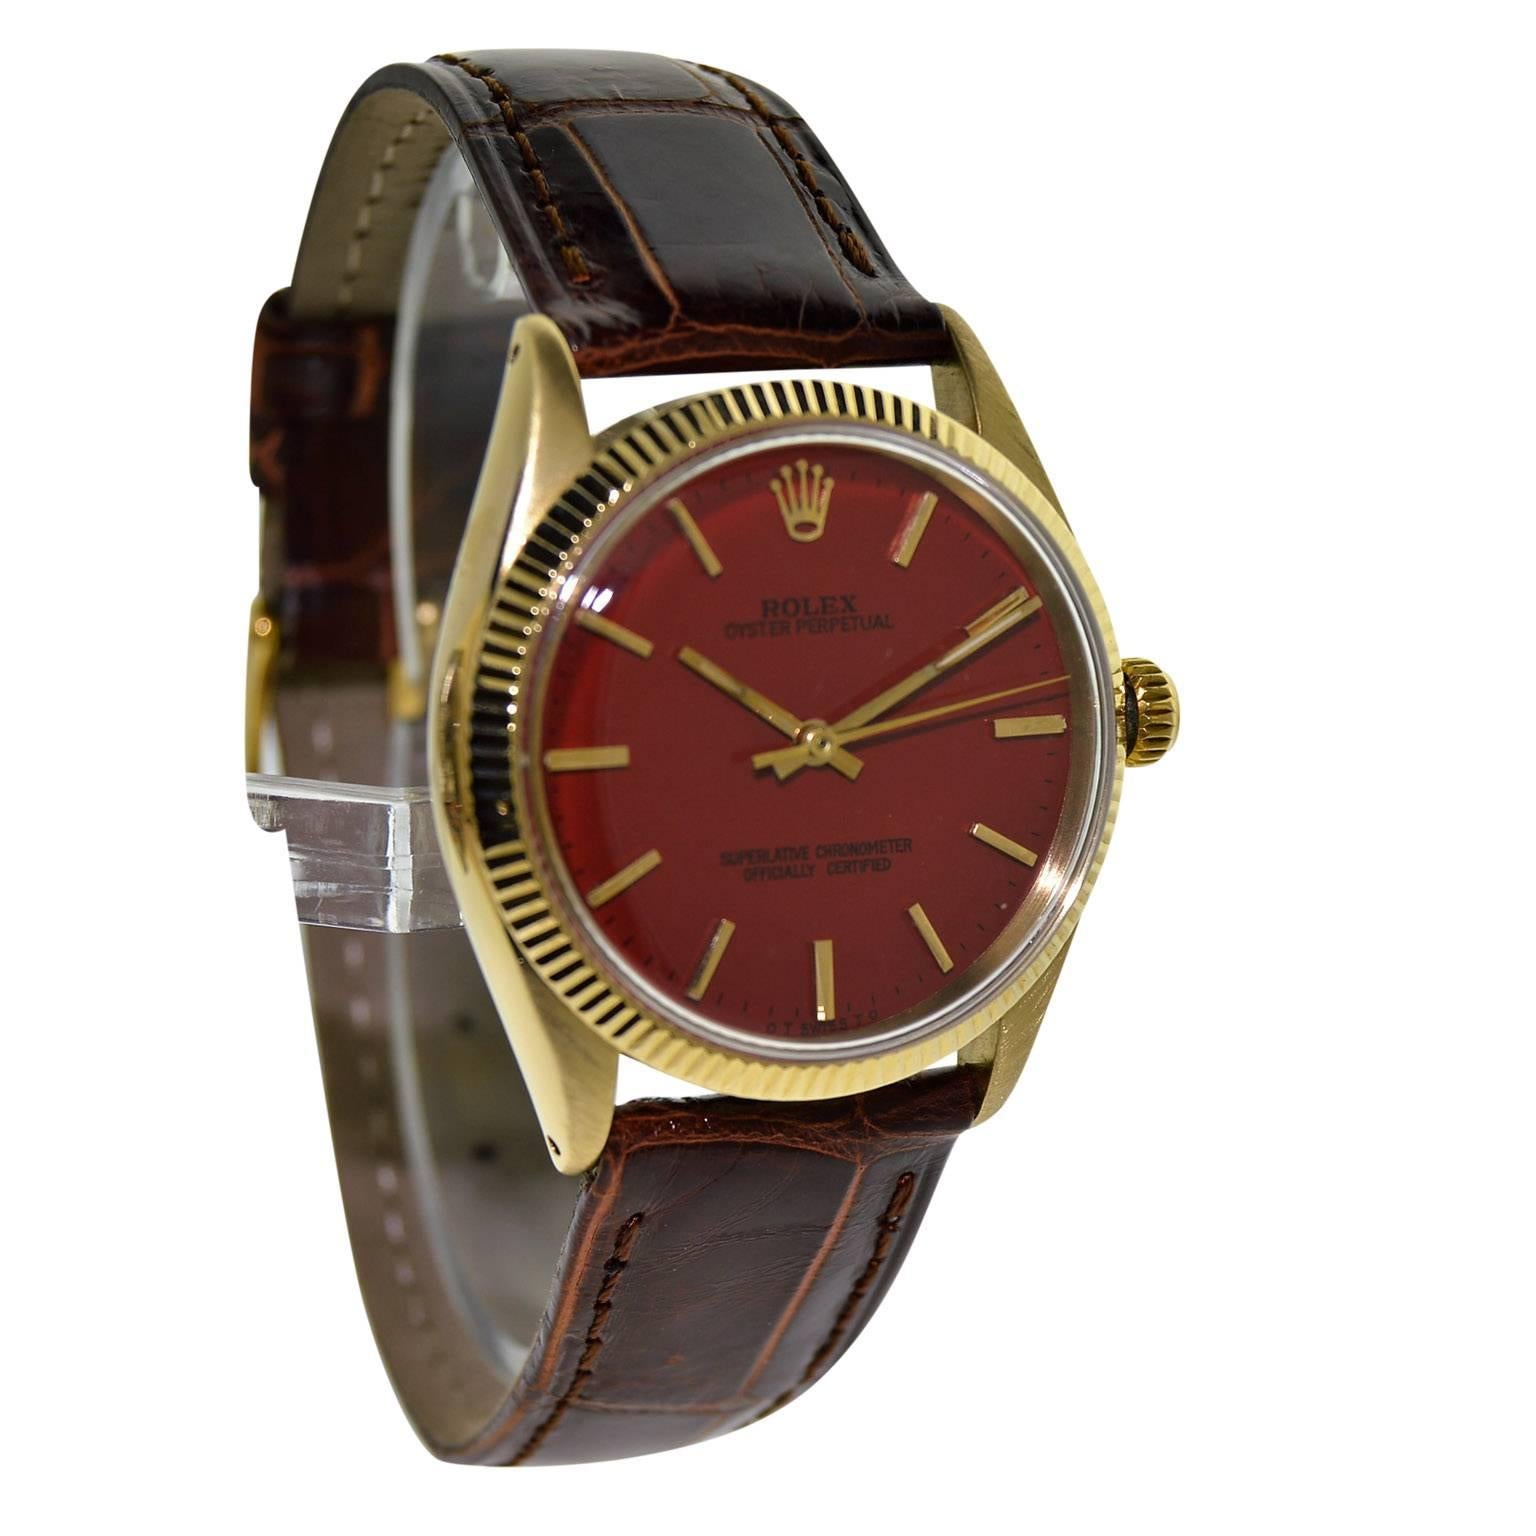 FACTORY / HOUSE: Rolex Watch Company
STYLE / REFERENCE: Oyster Perpetual / Ref. 1005
METAL / MATERIAL: 14Kt. Solid Yellow Gold
CIRCA: 1960's
DIMENSIONS: 39mm X 34mm
MOVEMENT / CALIBER: Perpetual Winding / 26 Jewels / Cal. 1560
DIAL / HANDS: Custom